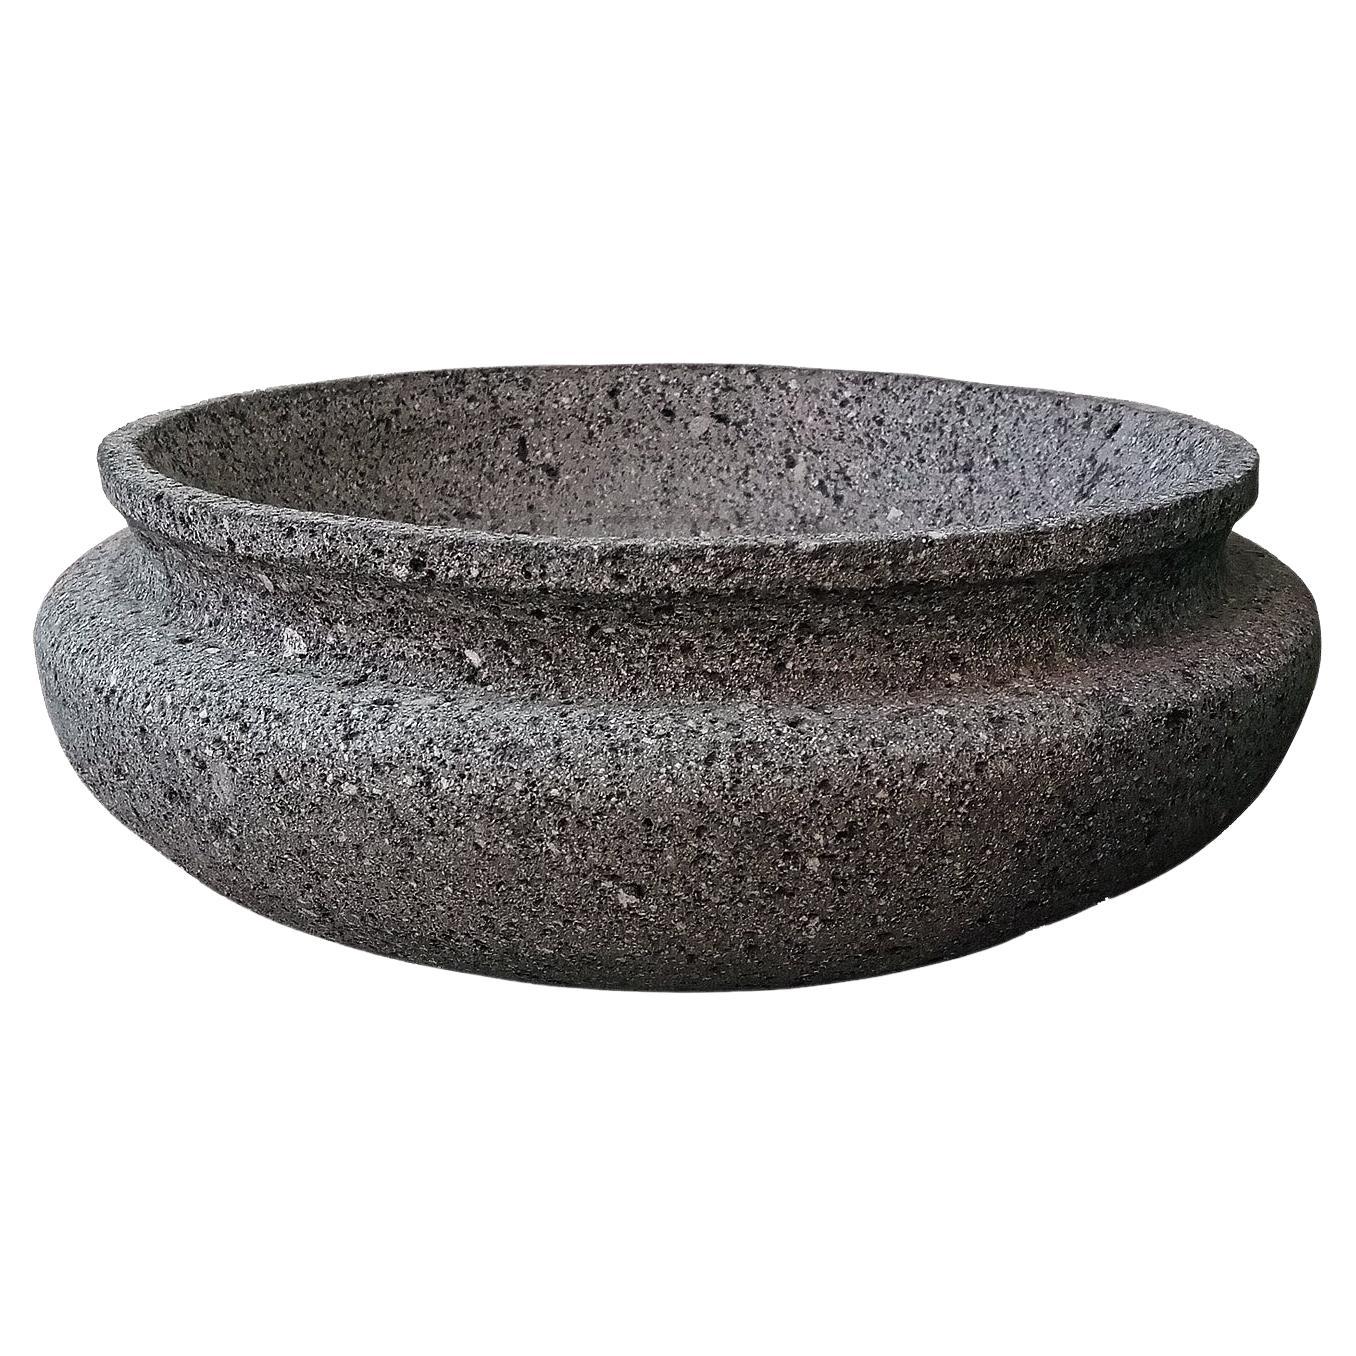 Grey Volcanic Stone Bowl For Sale